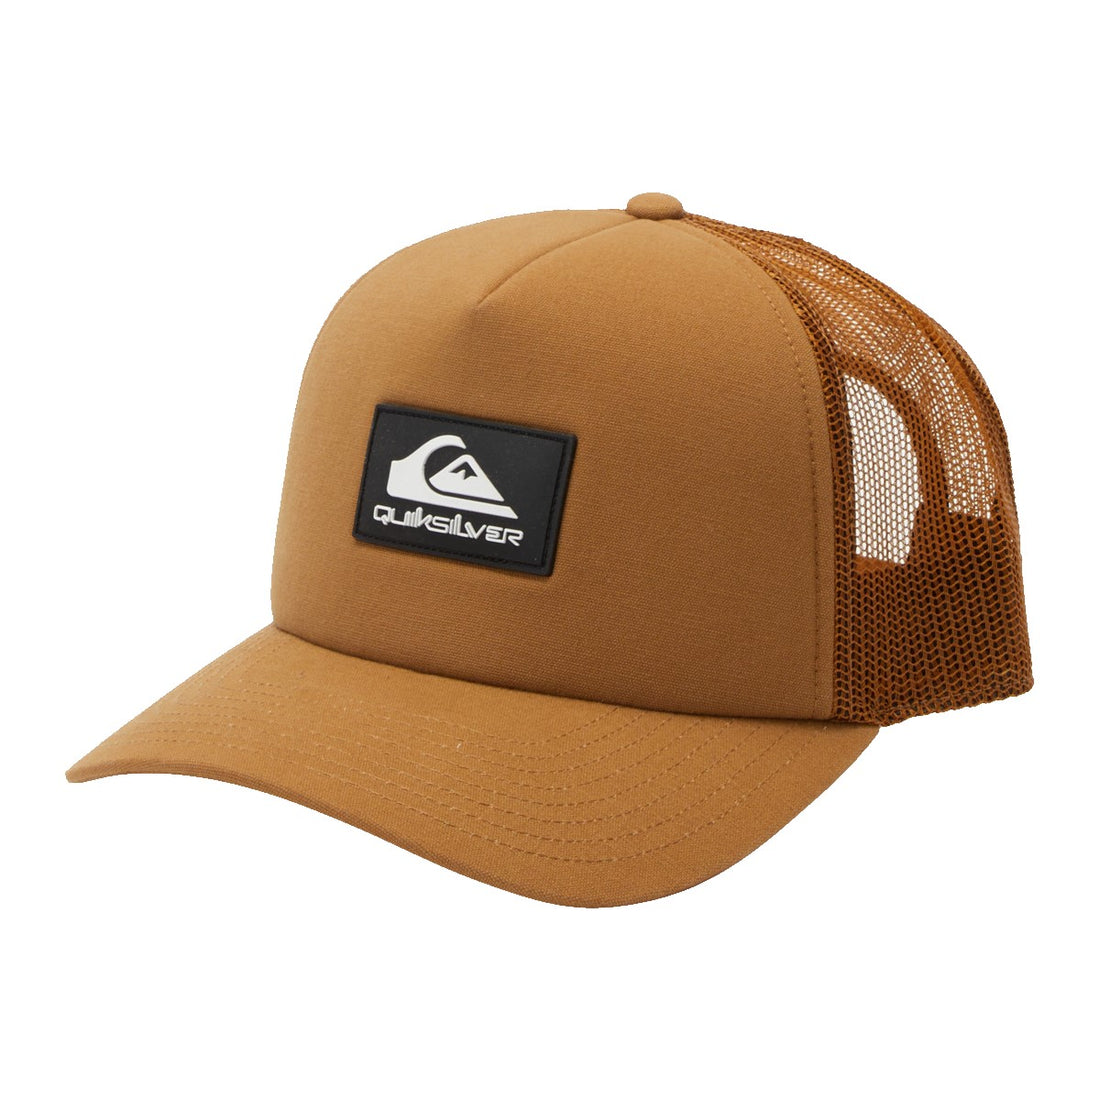 Buy the Best Hats & Caps Online at Freeride Surf & Skate – Tagged 